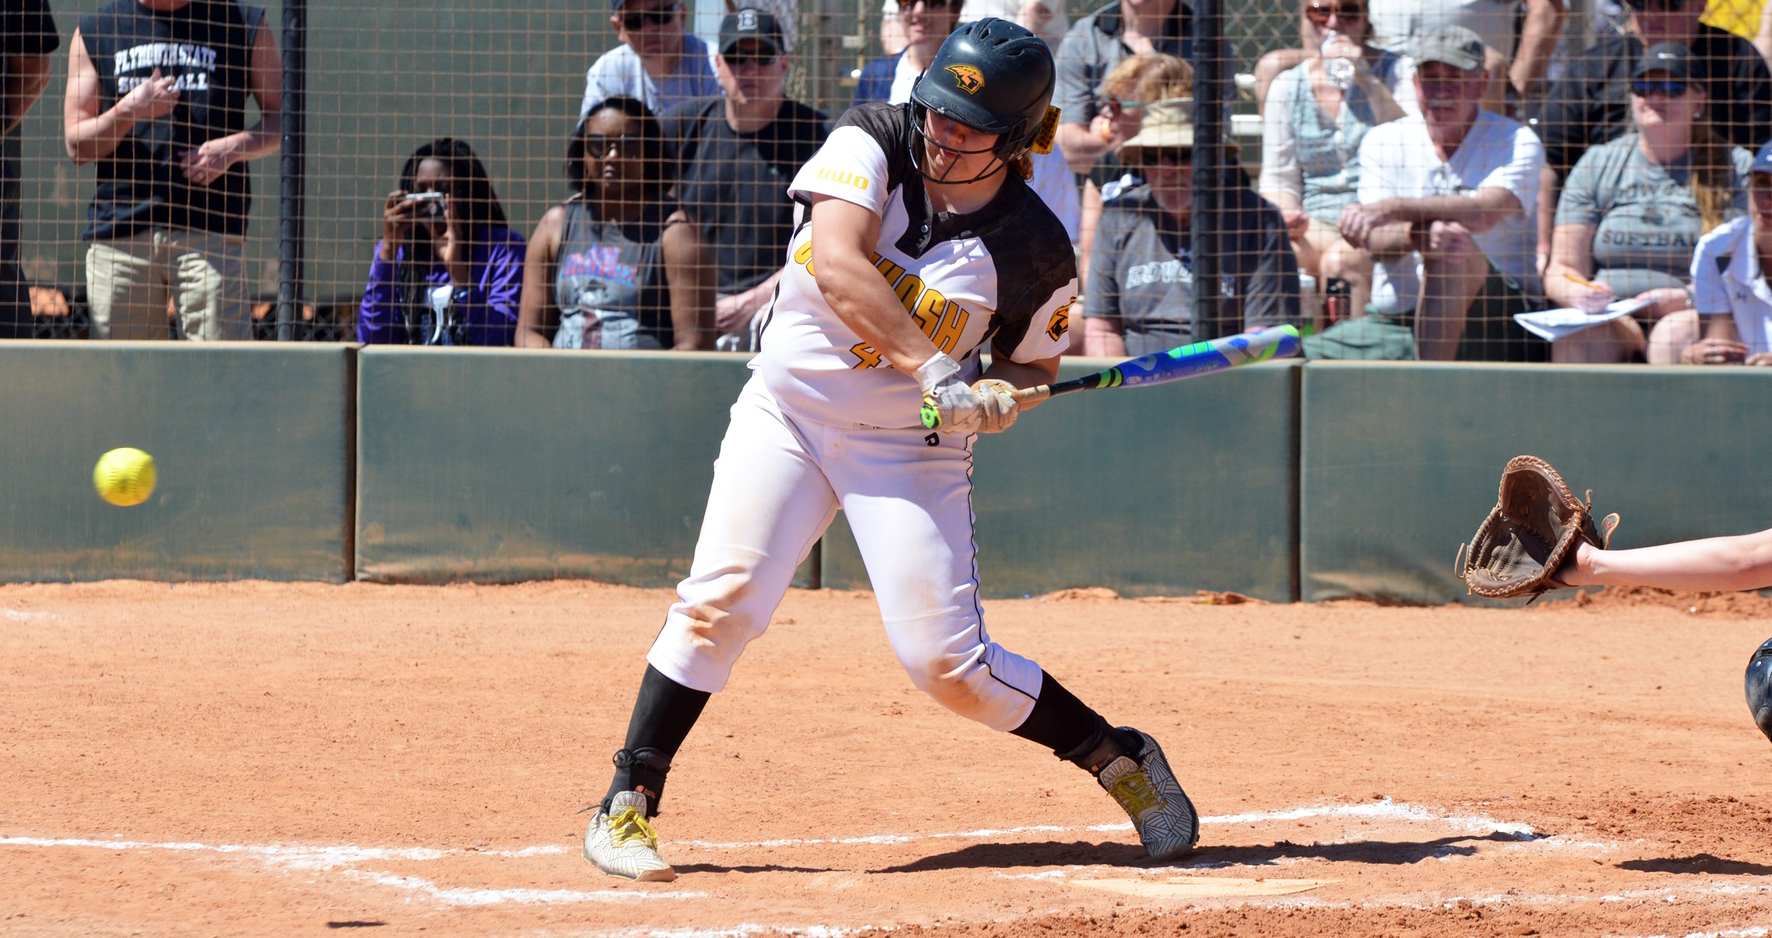 Kaitlyn Krol drove in two runs, including the eventual game-winner, during the Titans' victory over University of Chicago.